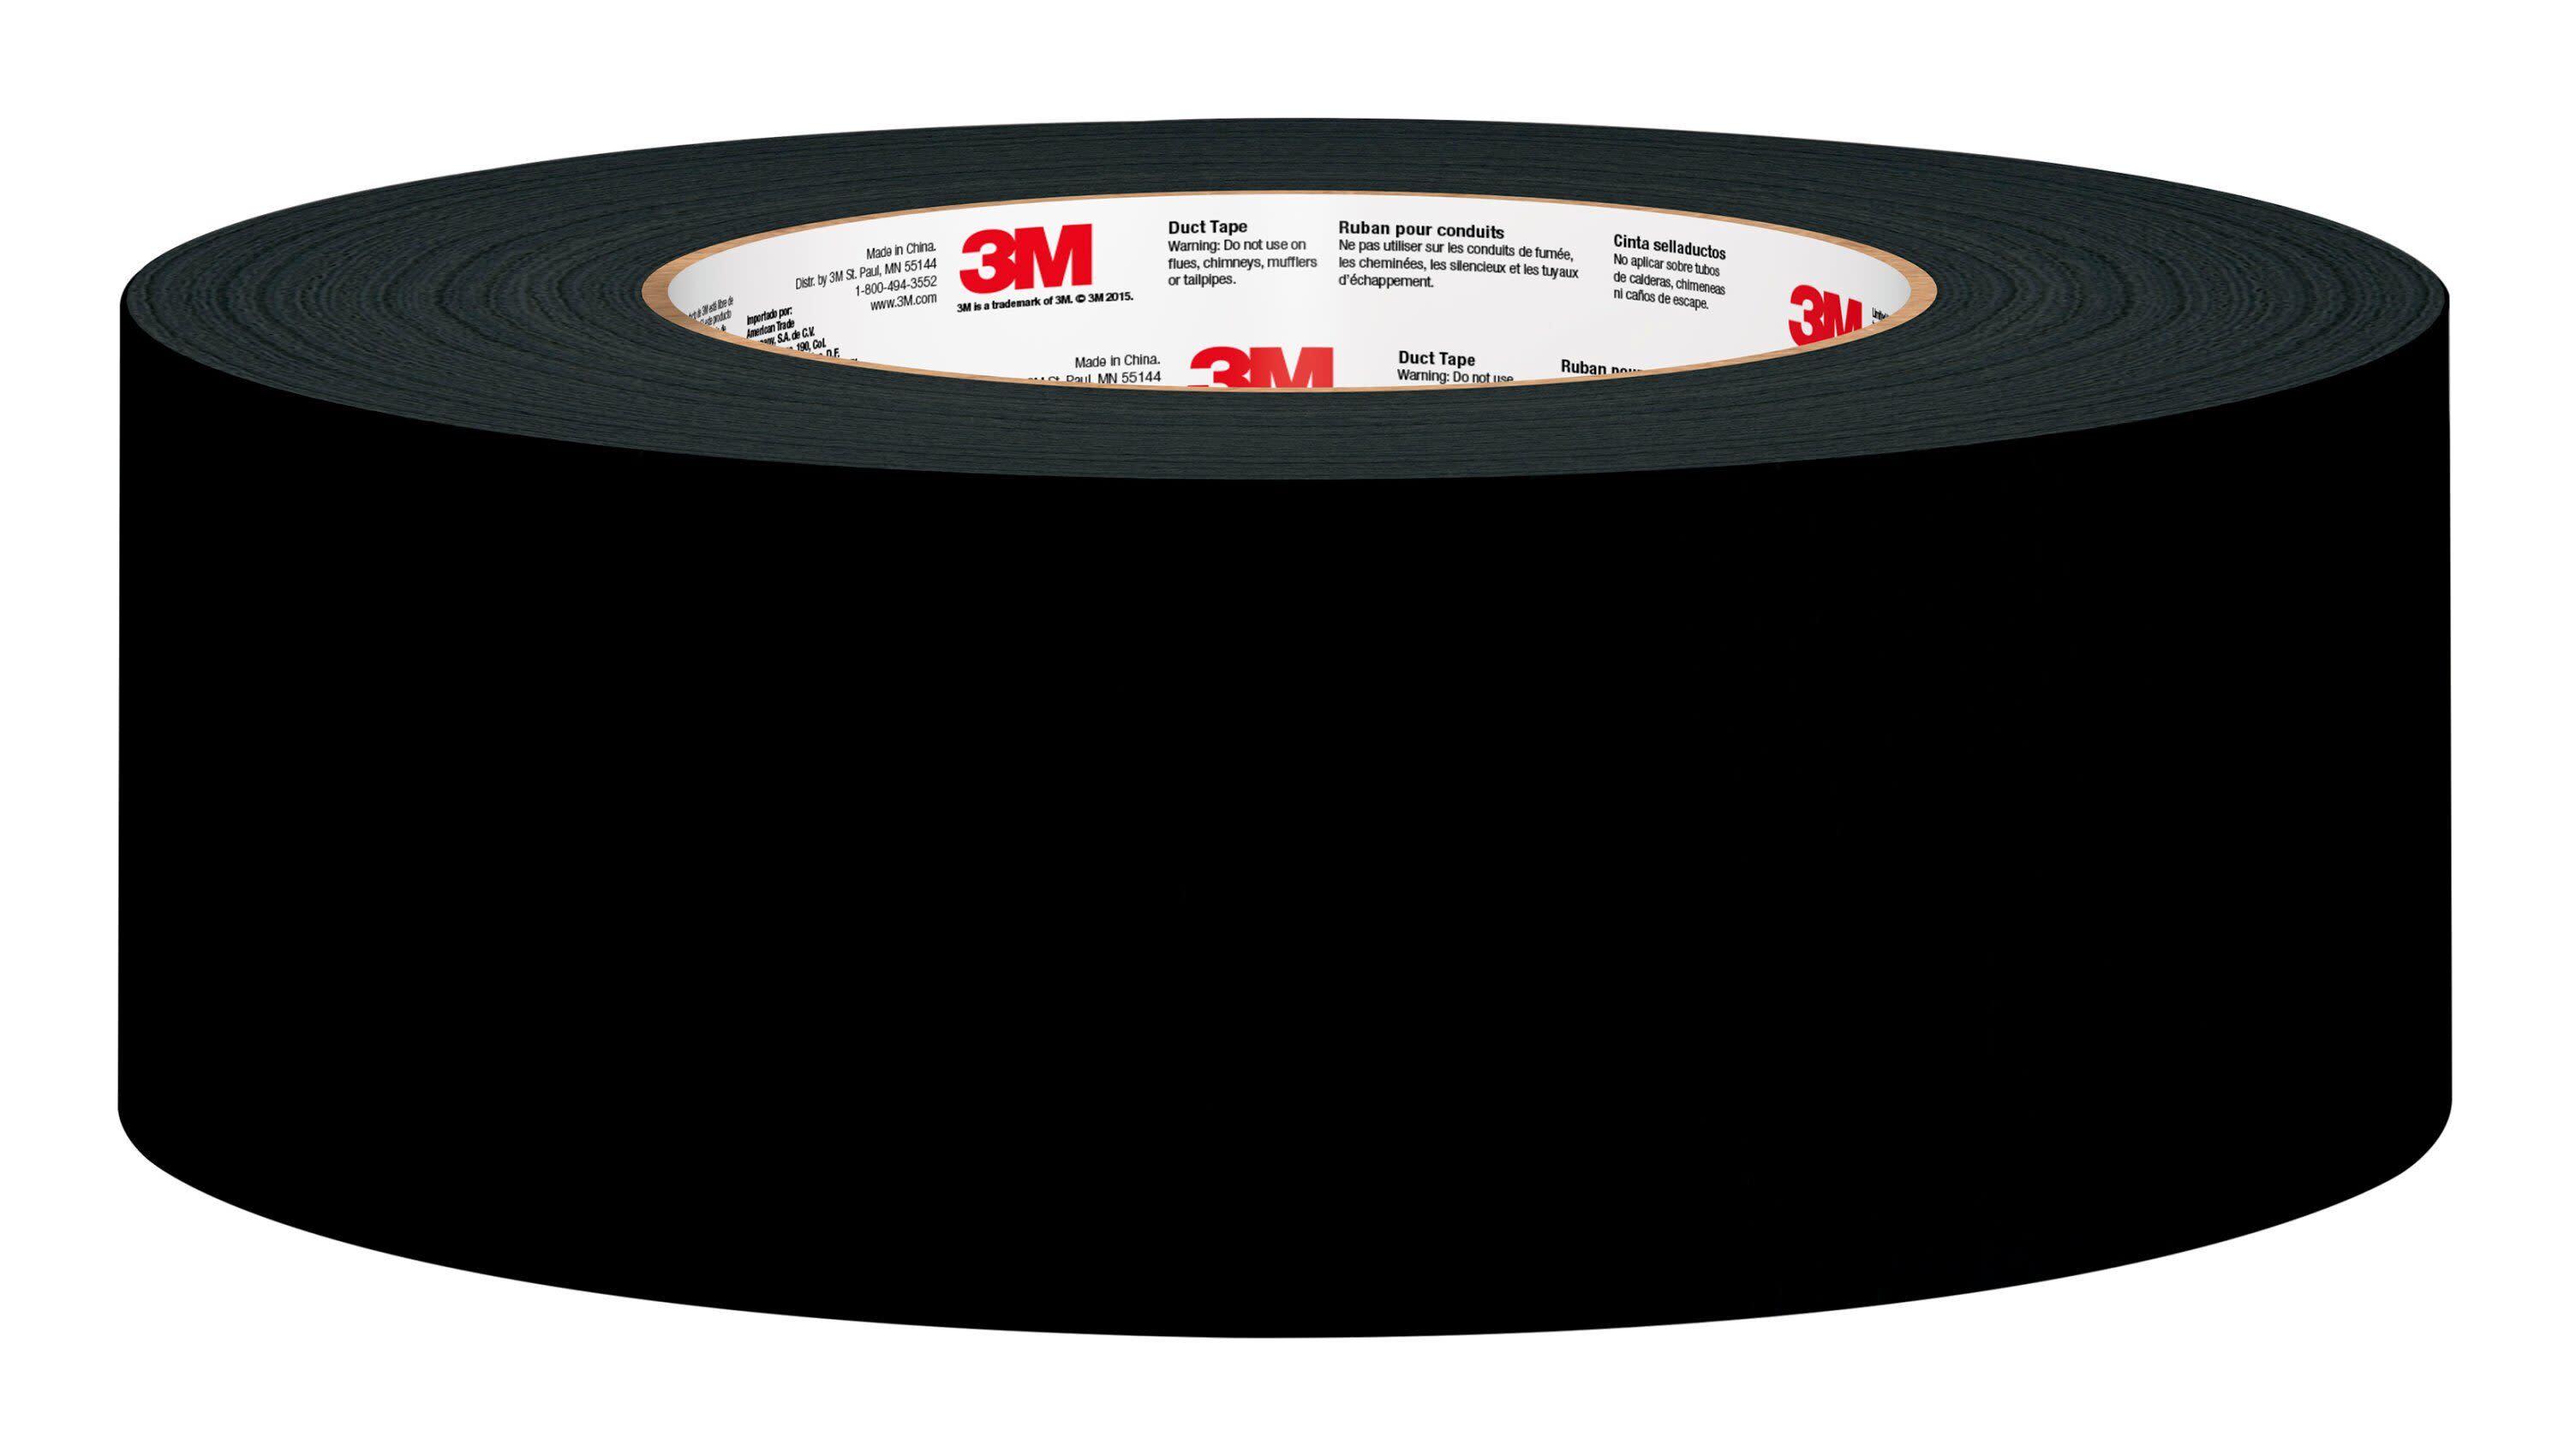 SENRISE Adhesive Acetate Cloth Tape Duct Tape Electrical Tape for Repairs  Waterproof 8mm-30mm Black/White 